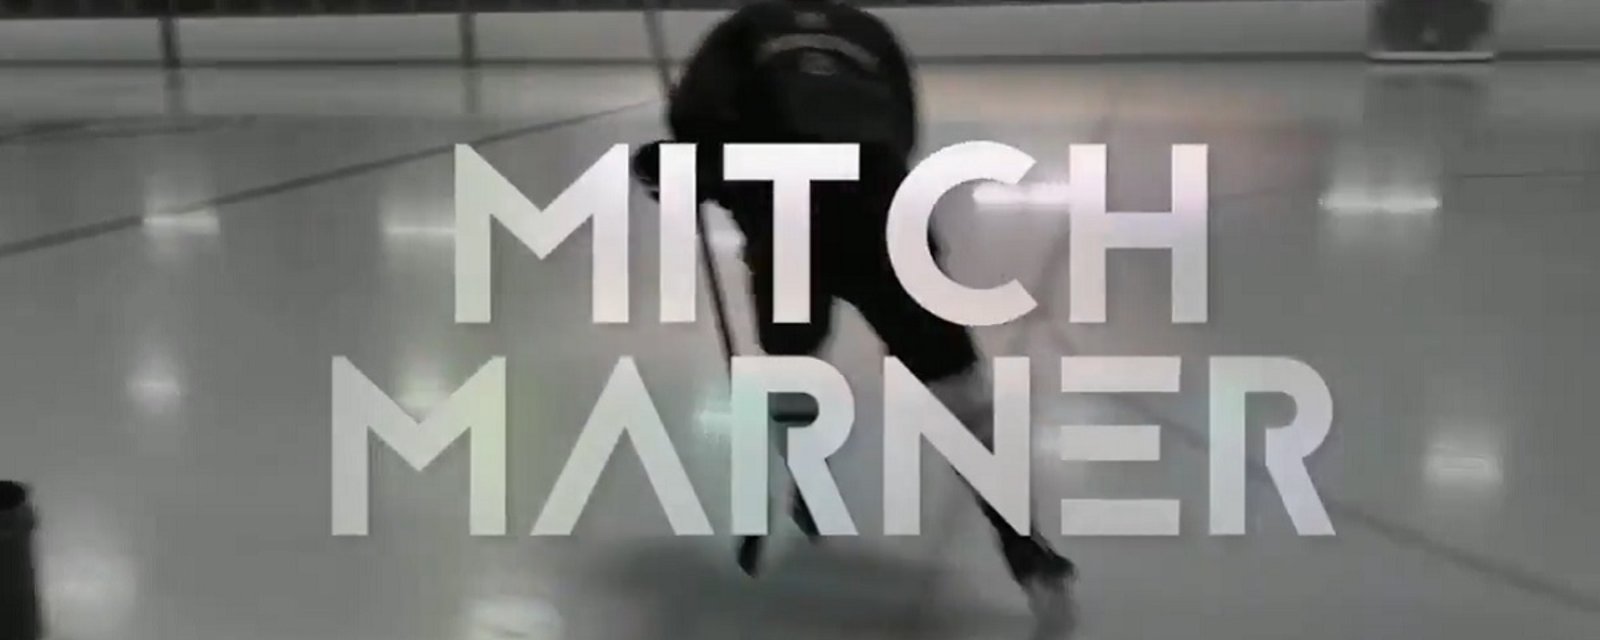 Mitch Marner shares highlights from his offseason workout program.